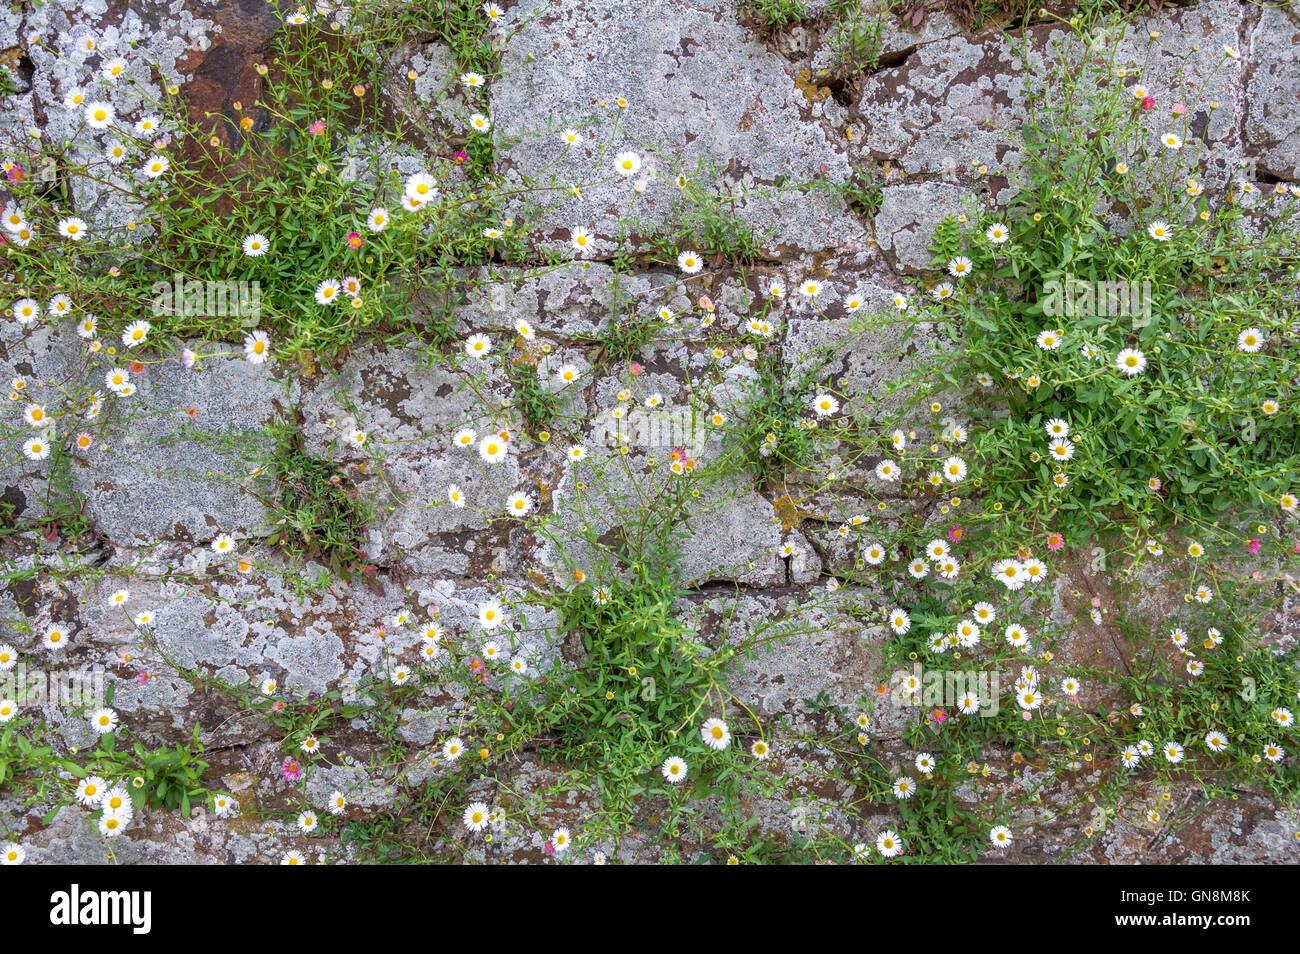 Small white daisies flowering on a stone wall and blowing in the wind. Stock Photo